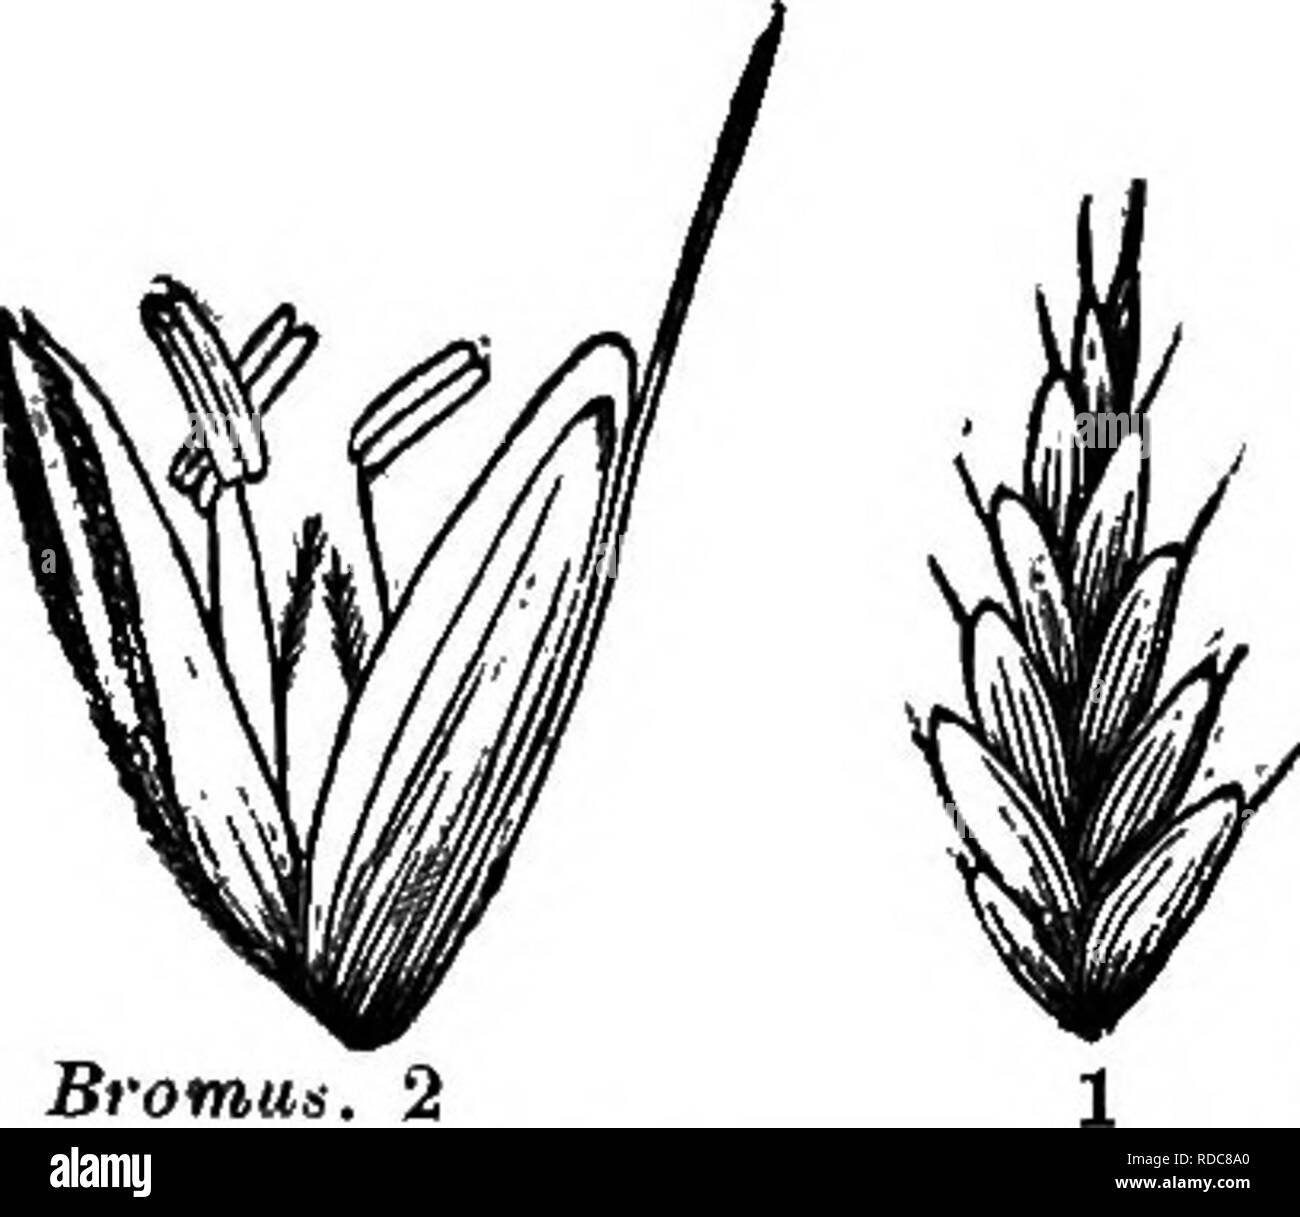 . The grasses of Tennessee; including cereals and forage plants. Grasses; Forage plants; Grain. IN TENNESSEE. 227 CHAPTER XIX. Bromus—Festuca—Poa—Eragrostis—Eatonia—Dl- ARRHENA—ElEUSINE—MeLIGA—GlV CERIA—GYMNO- pogon—Aristida—Stipa—Cynodon—Bouteloua— MtJHLENBERGIA — SPOROBULUS — VlLFA — ClNNA Agrostis—Bromtjs—Zizania—Leersia. BROMUS Ii.—{Brome Grass.) A spikelet of Bromus Secalimus, (1); a separate flower enlarged, (2). Spikelets 5, many flowered, panicled, glumes unequal, membranaceous, the lower 1-5, the upper 3-9 nerved, lower palet either convex on the back or compressed, keeled, 5-9 nerved Stock Photo